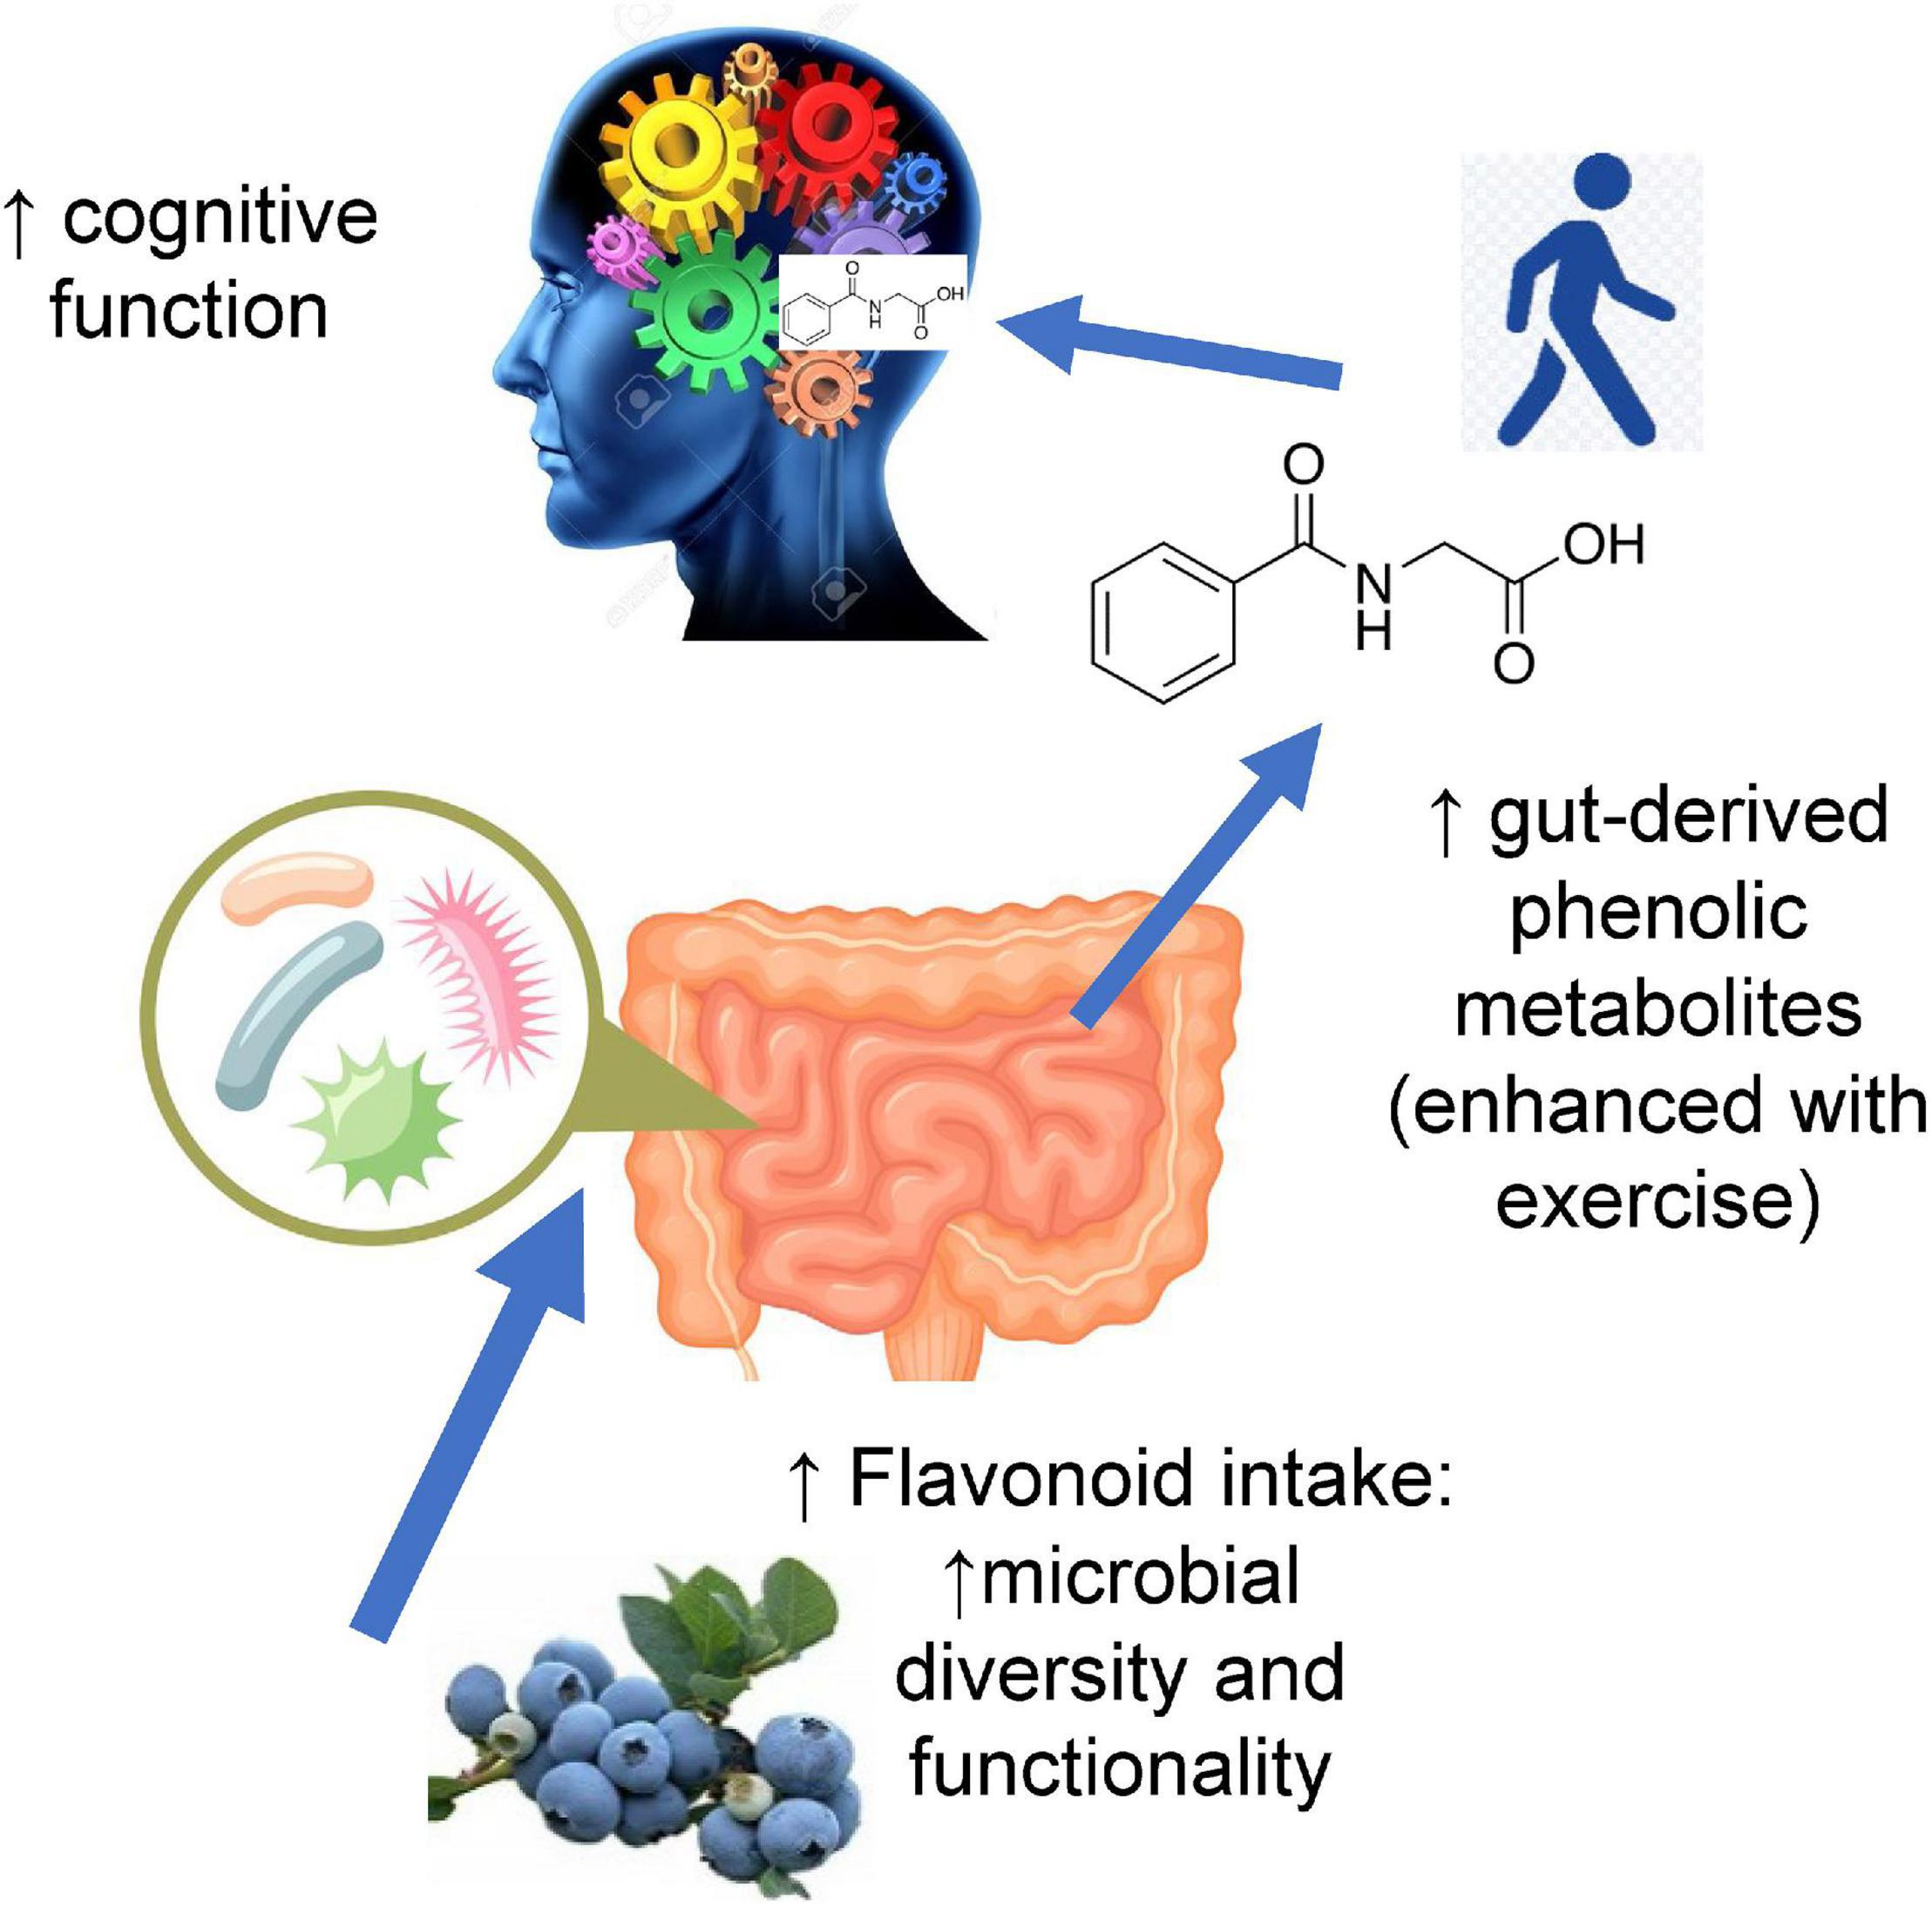 Polyphenols and cognitive function